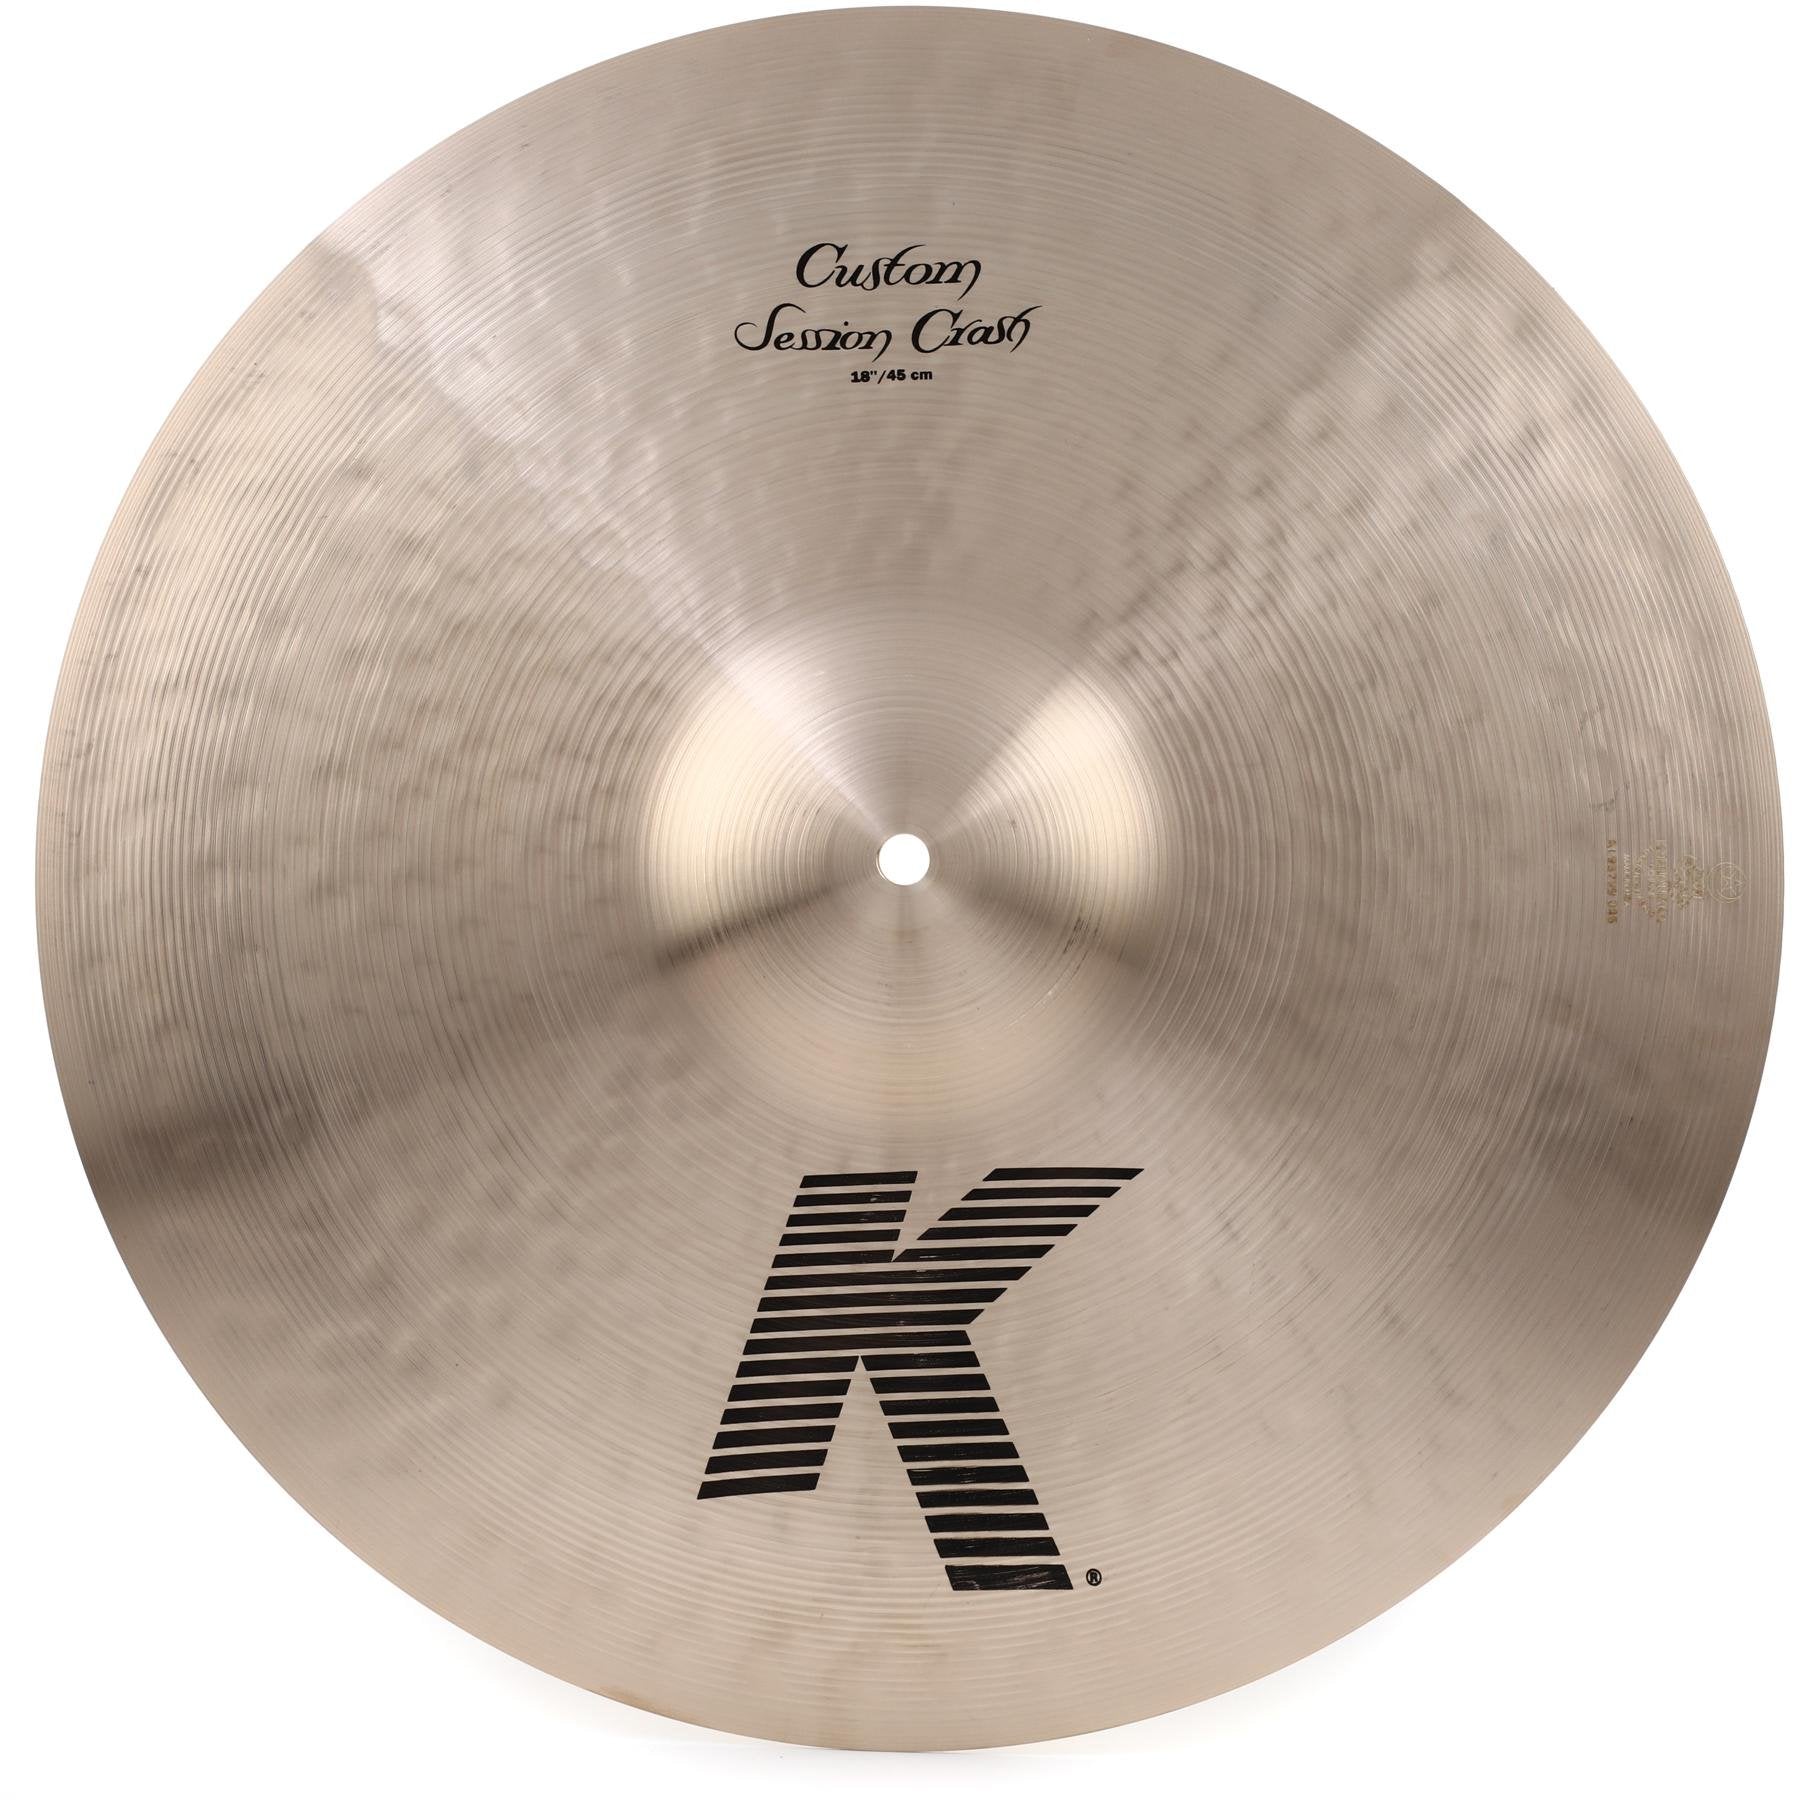 ZILDJIAN K Custom Session Crash Cymbal (Available in various sizes)